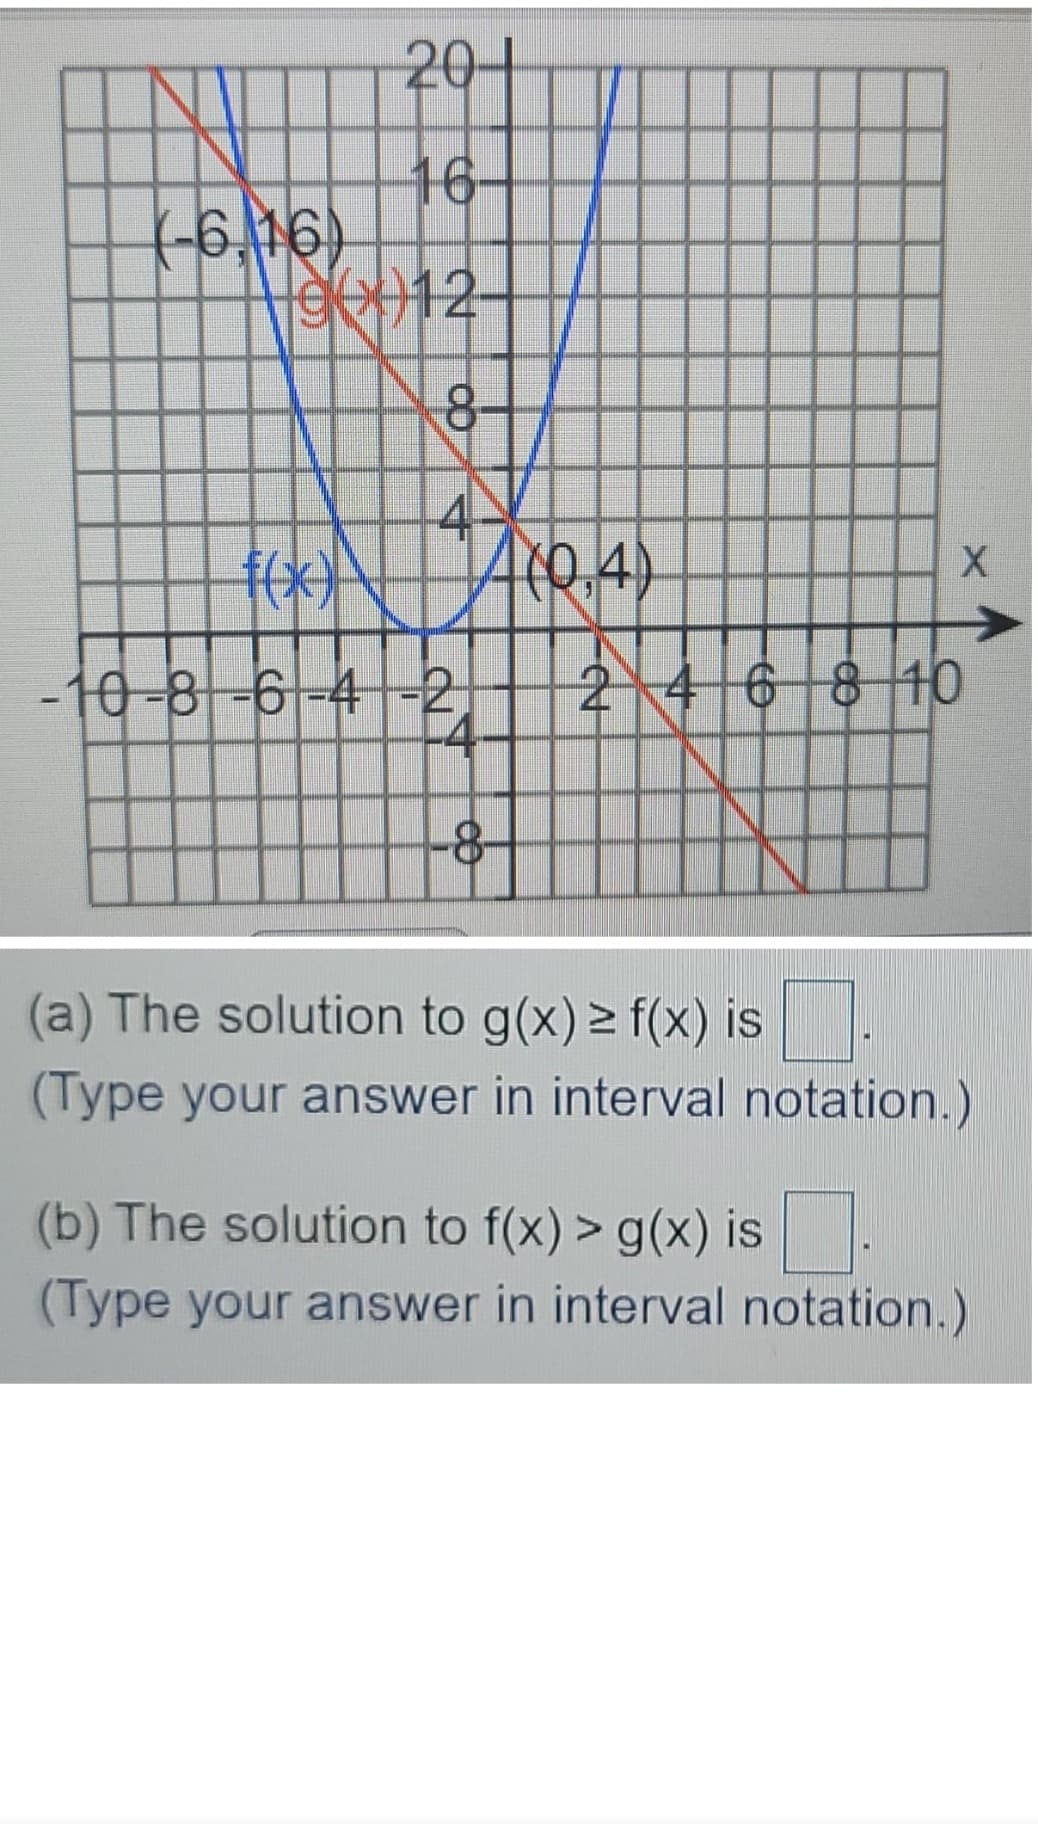 201
16-
(9t9-)
+12
4
A0.4)
-10-8-6-4 -2
246
810
(a) The solution to g(x) > f(x) is
(Type your answer in interval notation.)
(b) The solution to f(x) > g(x) is
(Type your answer in interval notation.)
